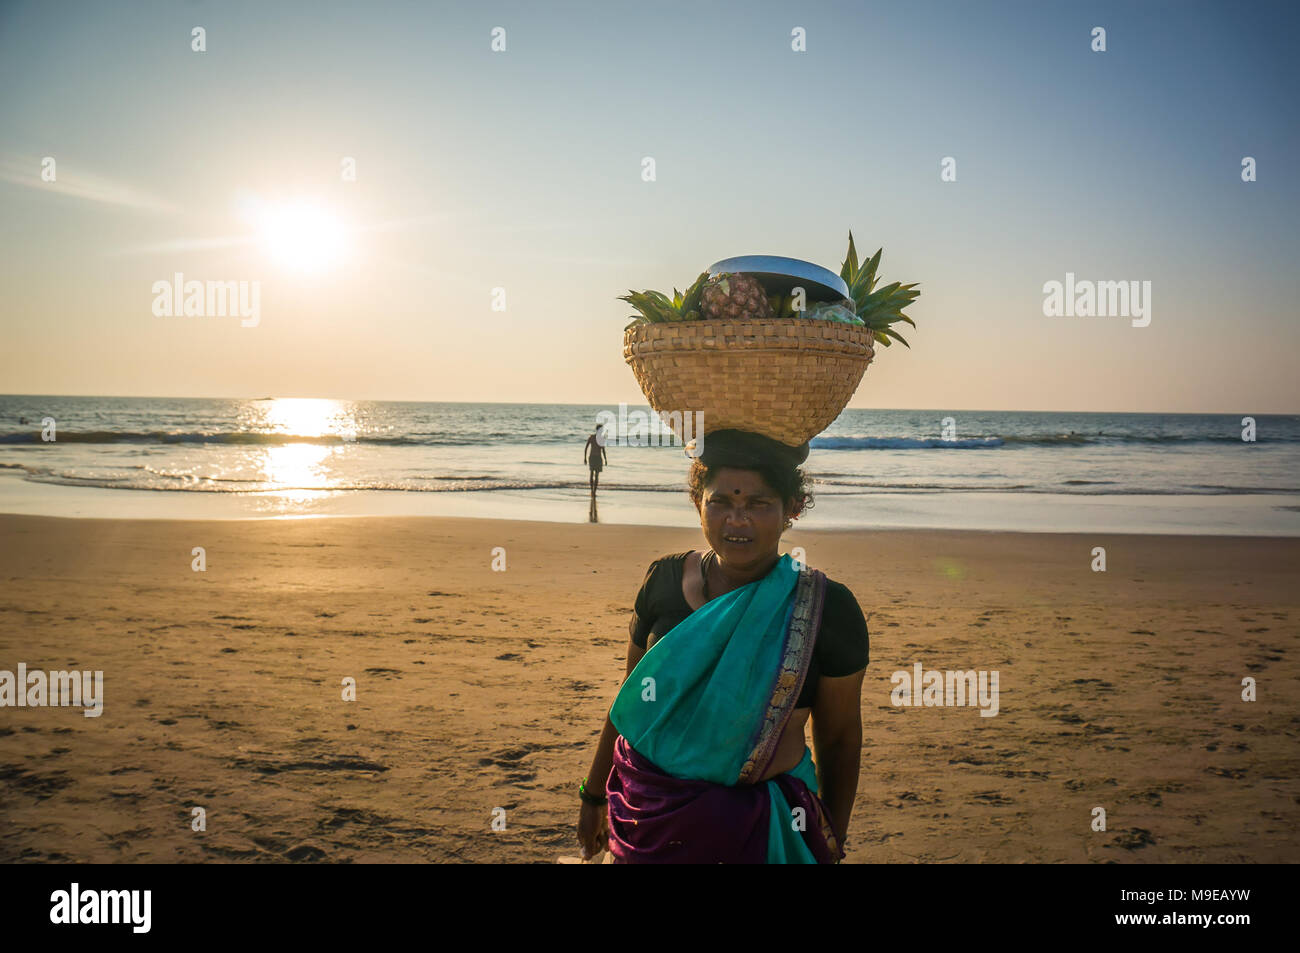 A woman with a wicker basket on his head selling fruit on the beach, India, Gokarna. Photo taken March 22, 2017. Stock Photo